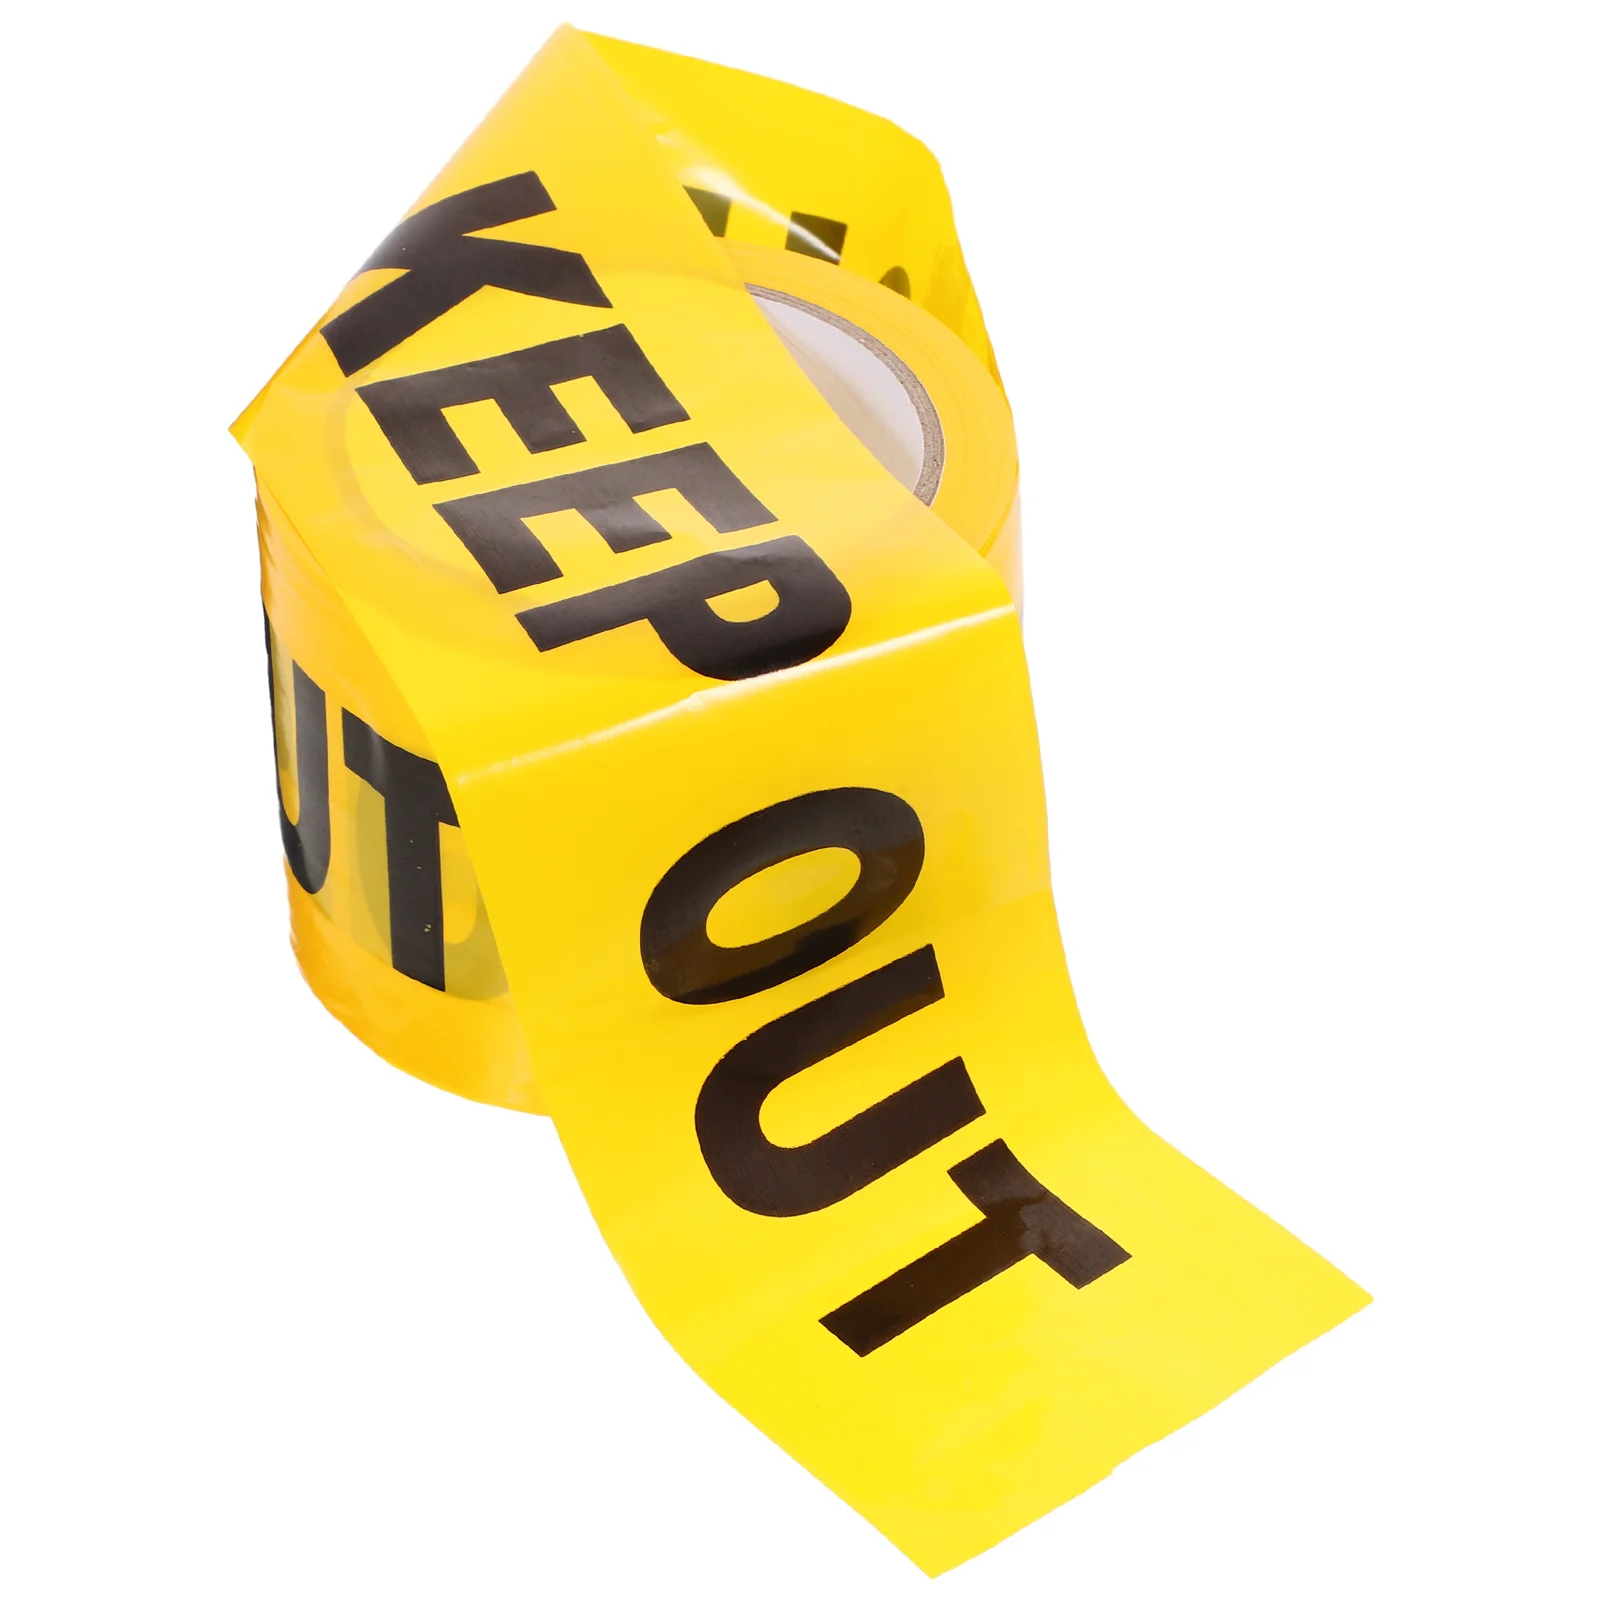 

Non-adhesive Warning Tape Keep Out Crime Scene Caution Hazardous Areas Safety Bathroom Decorations